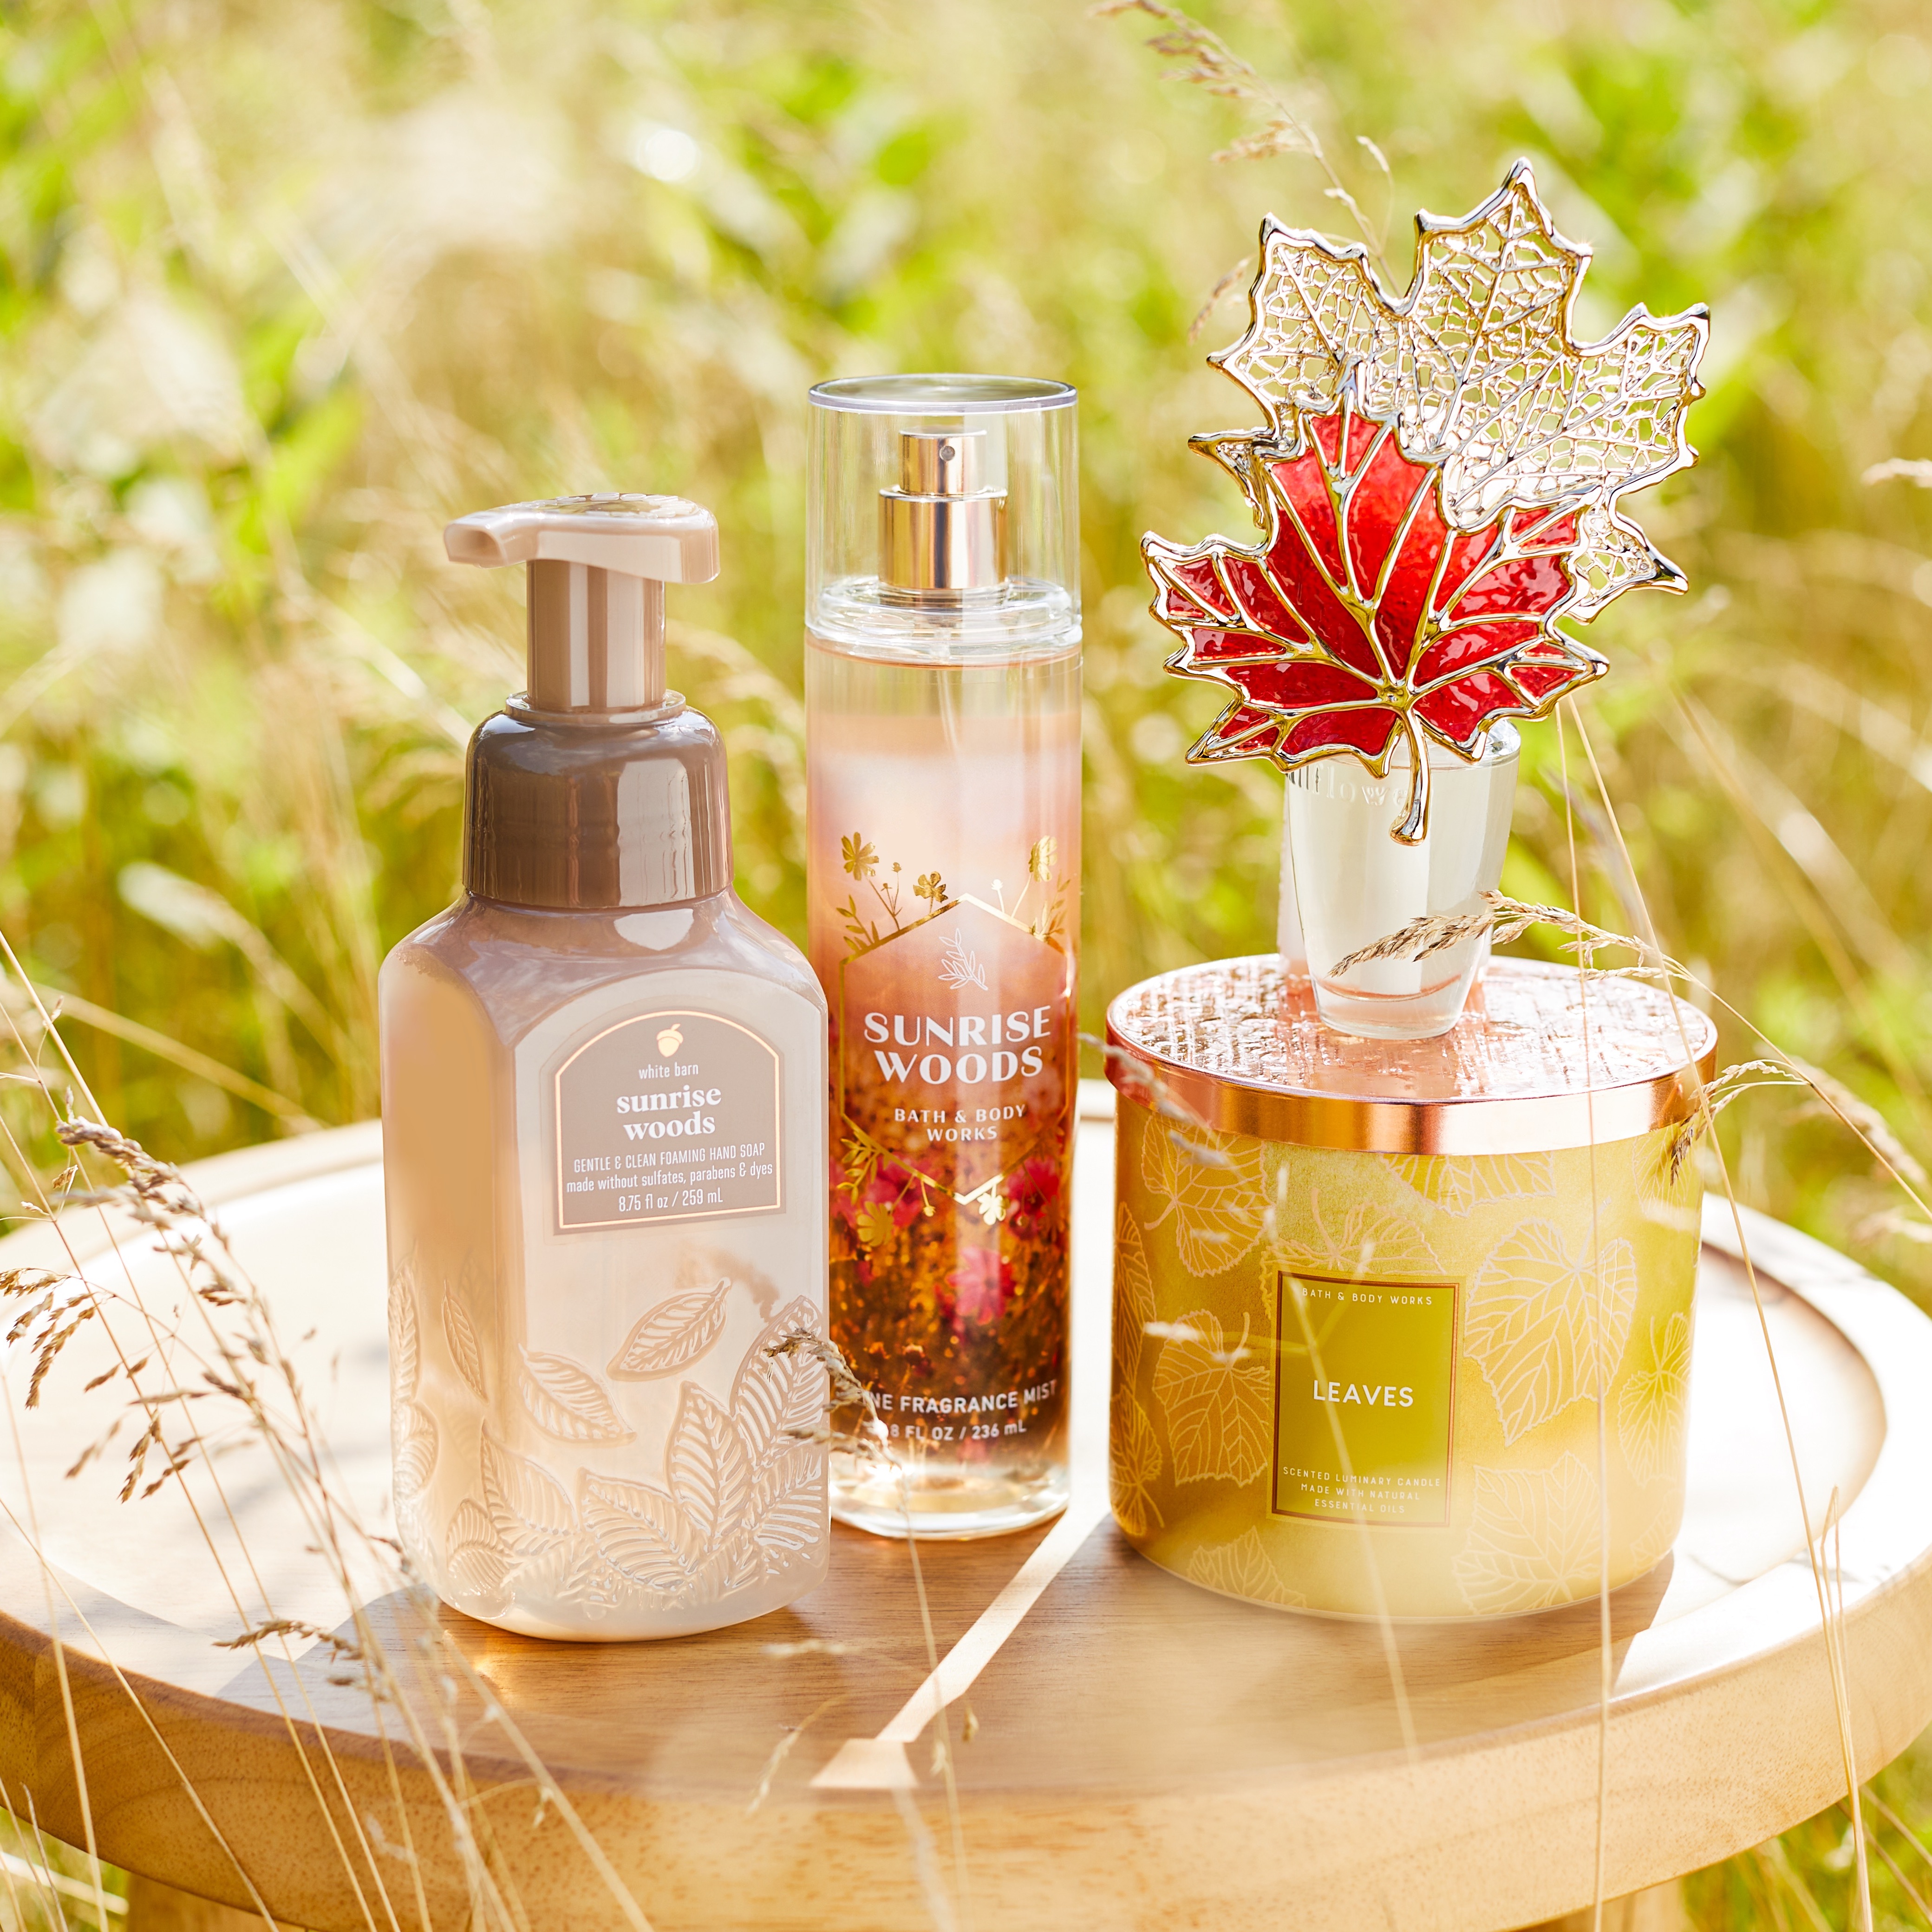 Can you BELEAF it?! Fall is HERE at Bath & Body Works! from Bath & Body Works